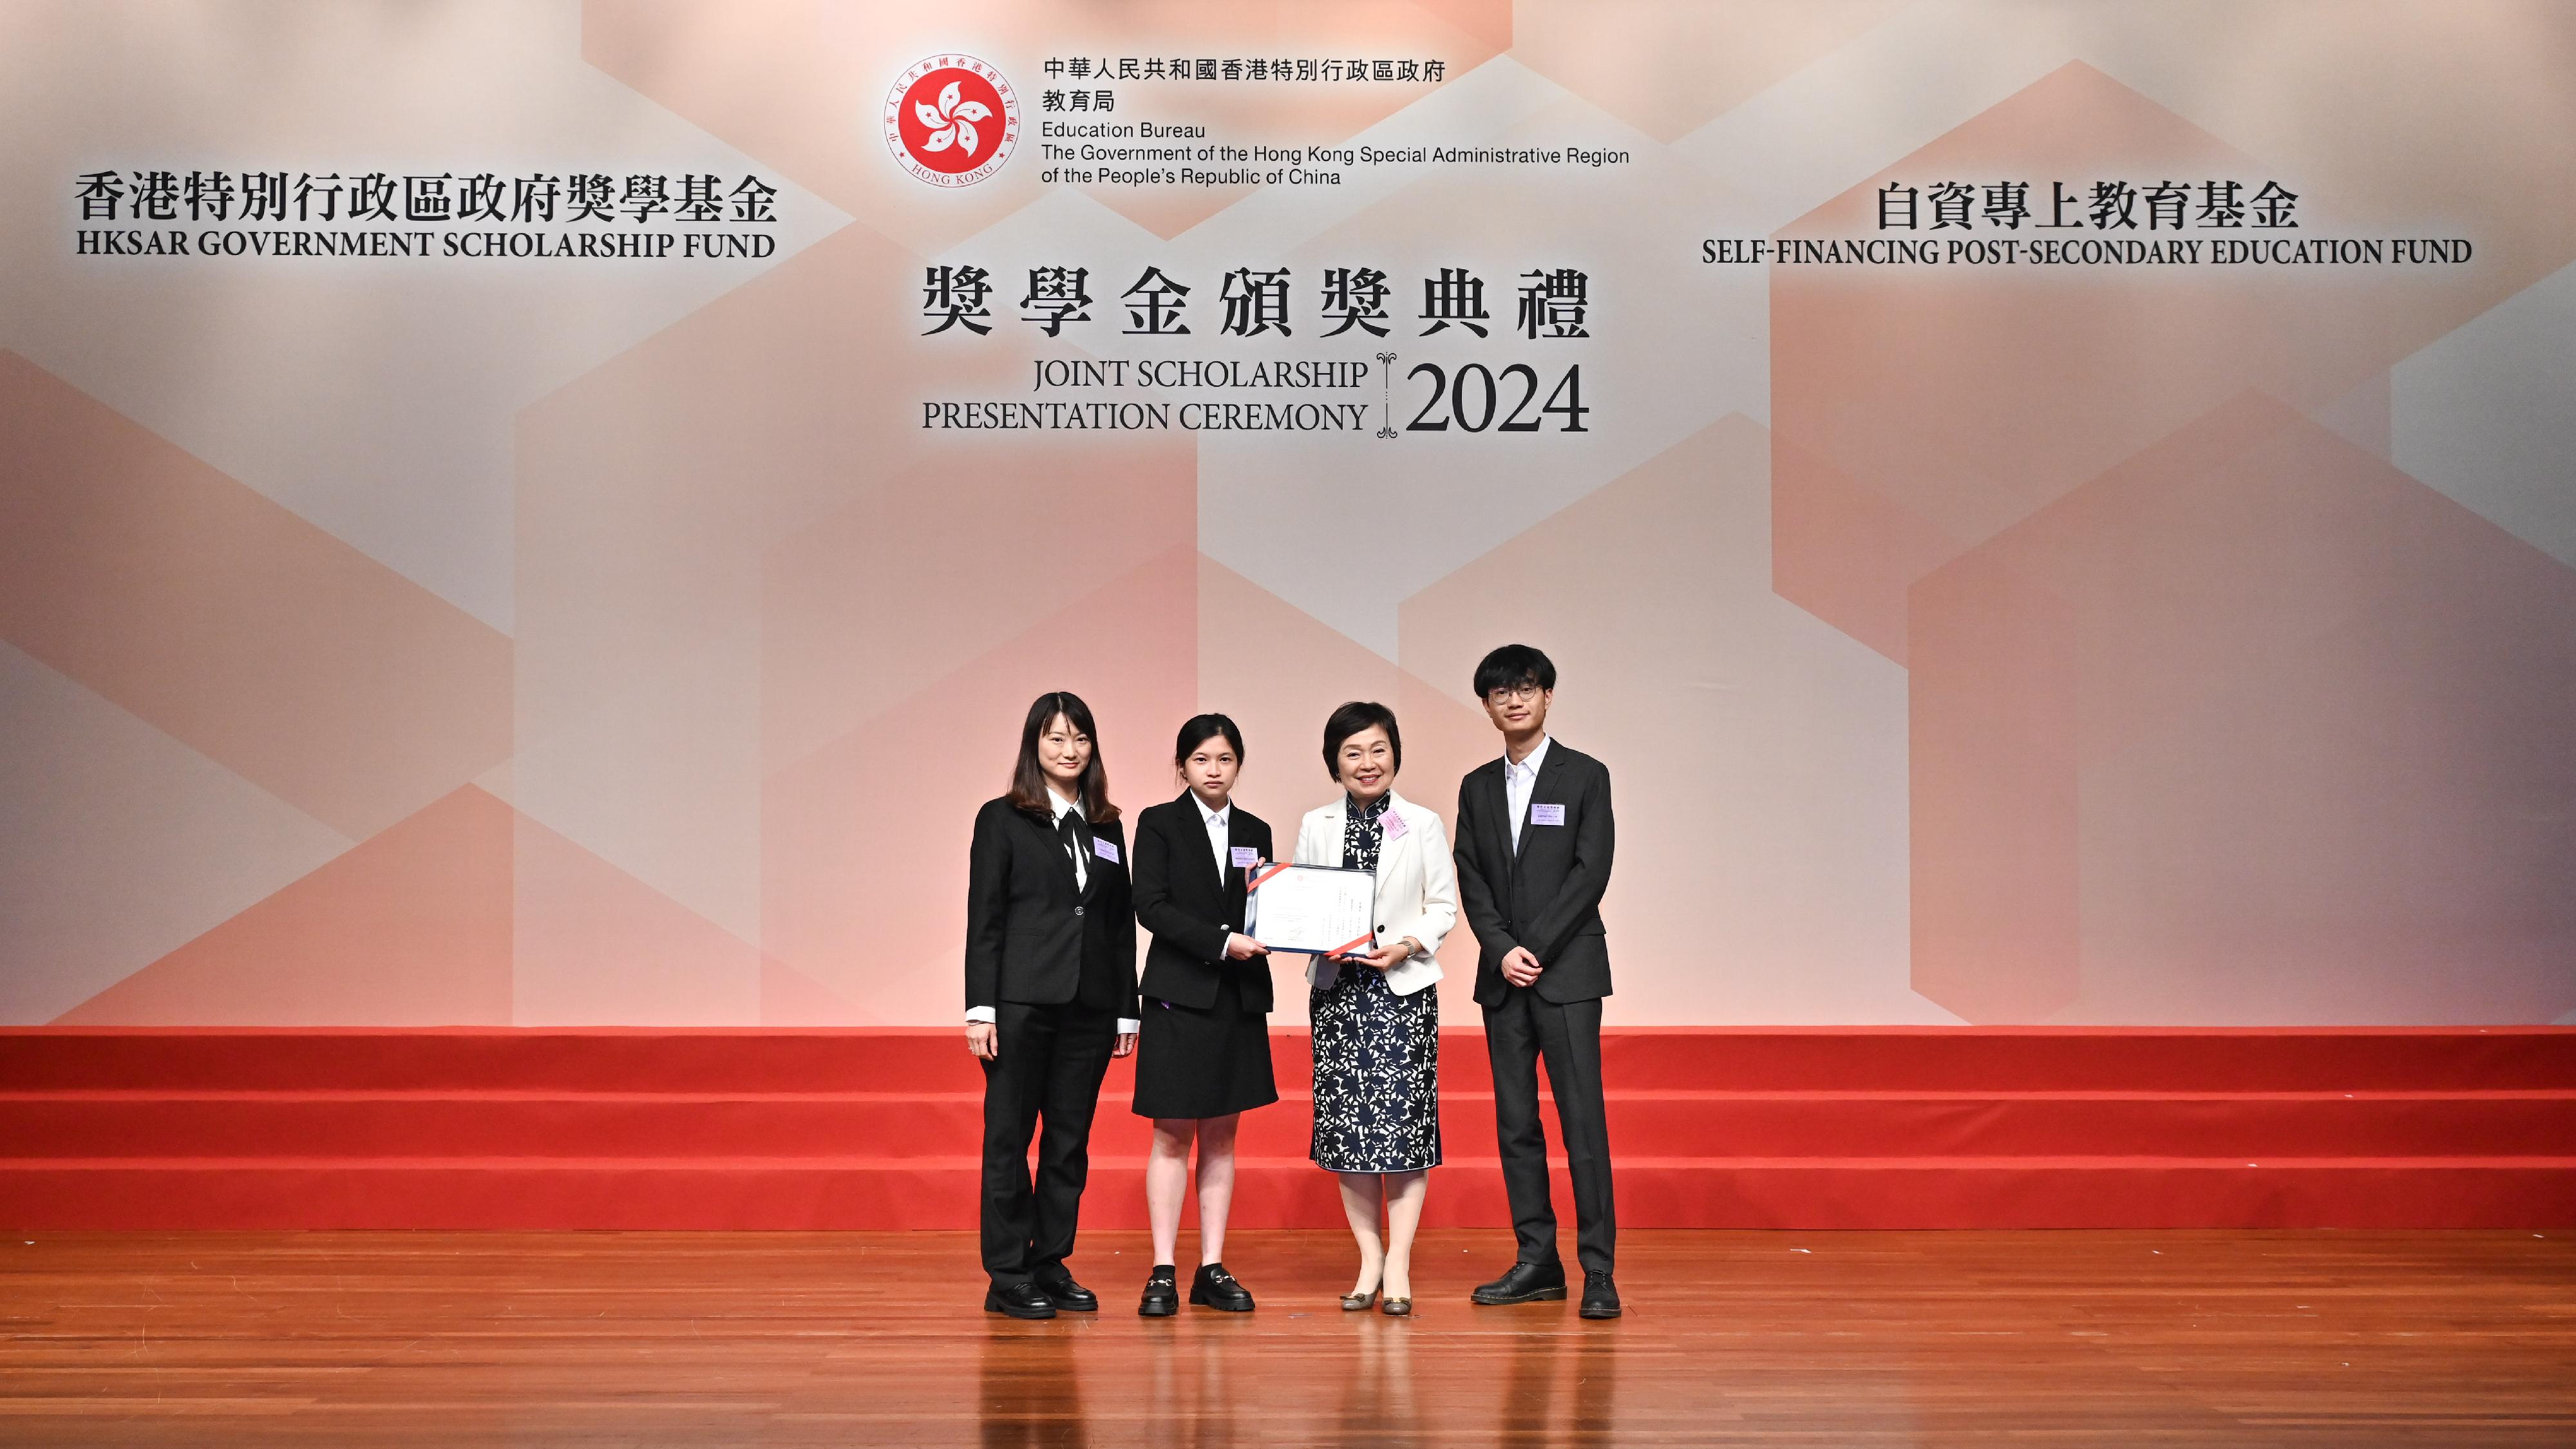 The Education Bureau held the HKSAR Government Scholarship Fund and Self-financing Post-secondary Education Fund Joint Scholarship Presentation Ceremony today (April 25). Photo shows the Secretary for Education, Dr Choi Yuk-lin (second right), presenting a certificate to students who are awarded scholarships under the Self-financing Post-secondary Education Fund.